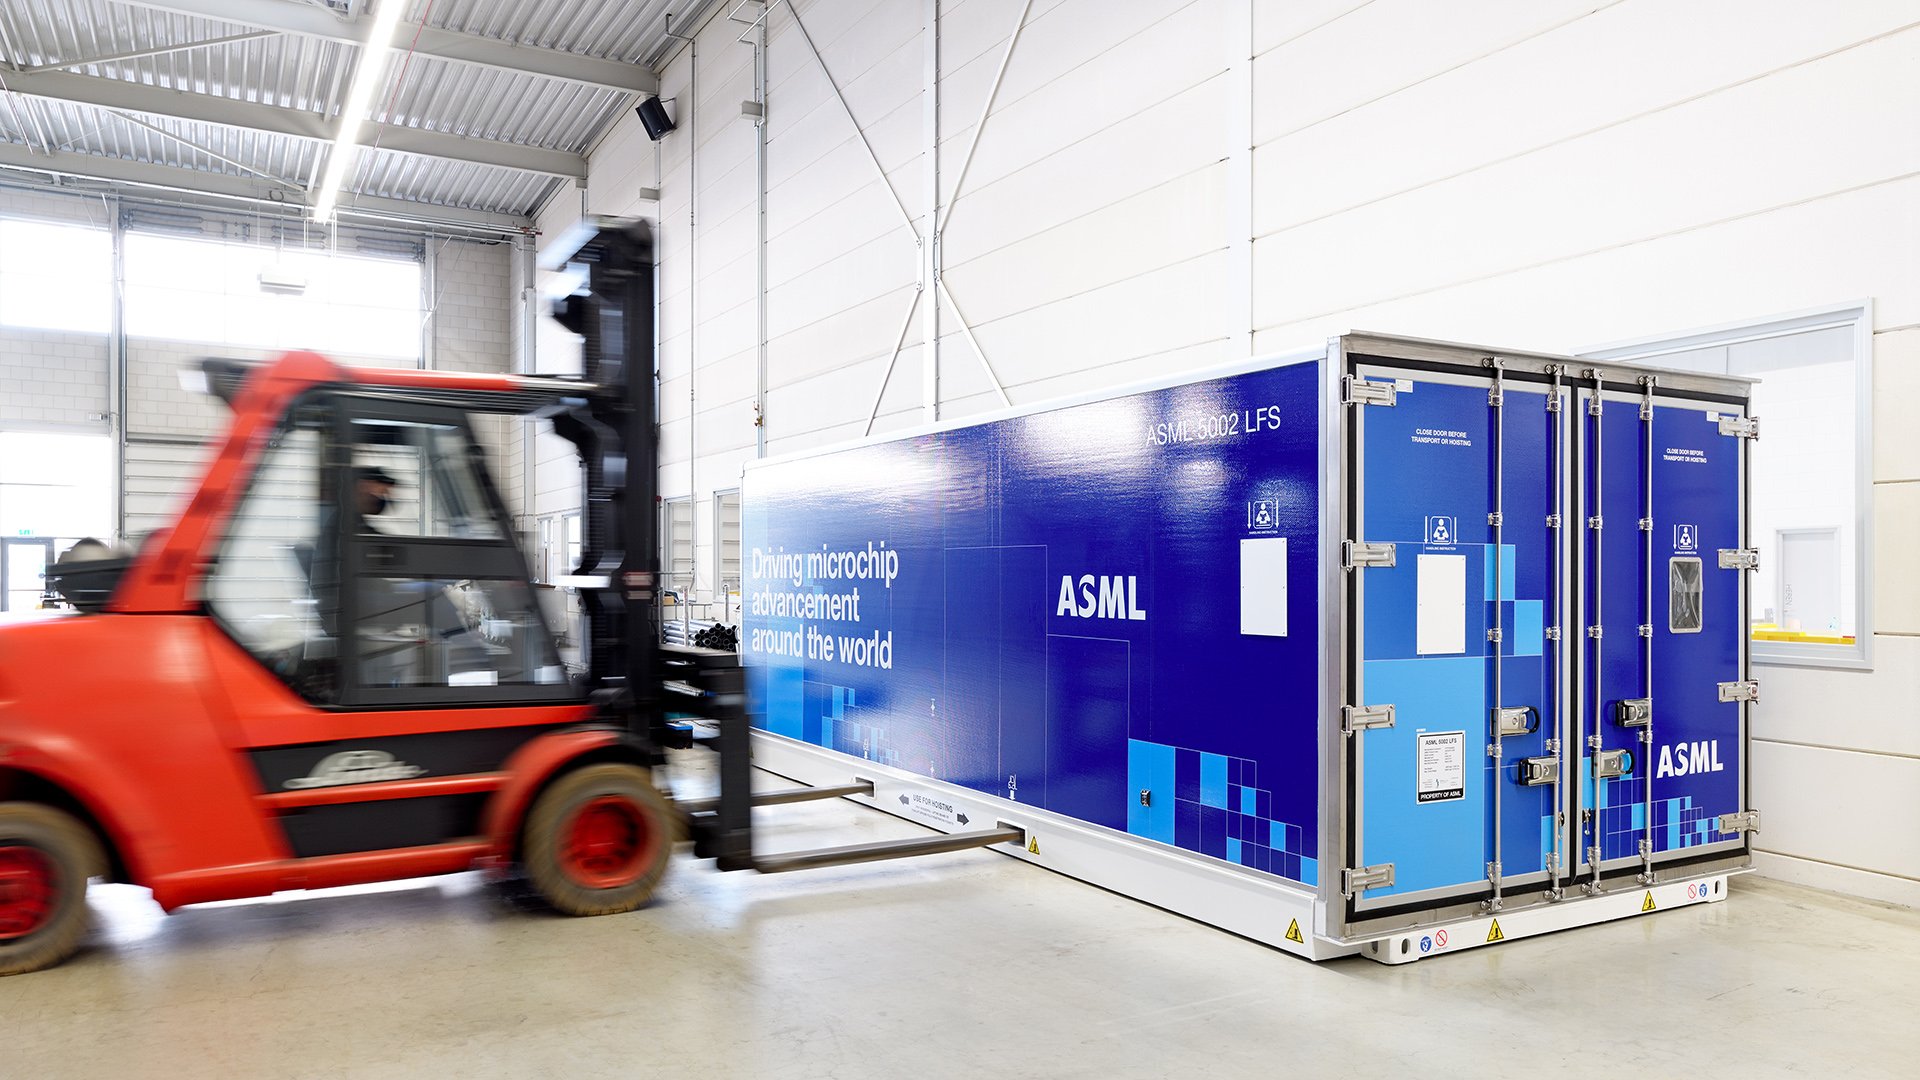 Inside a warehouse, a red forklift moves towards an ASML shipping container.